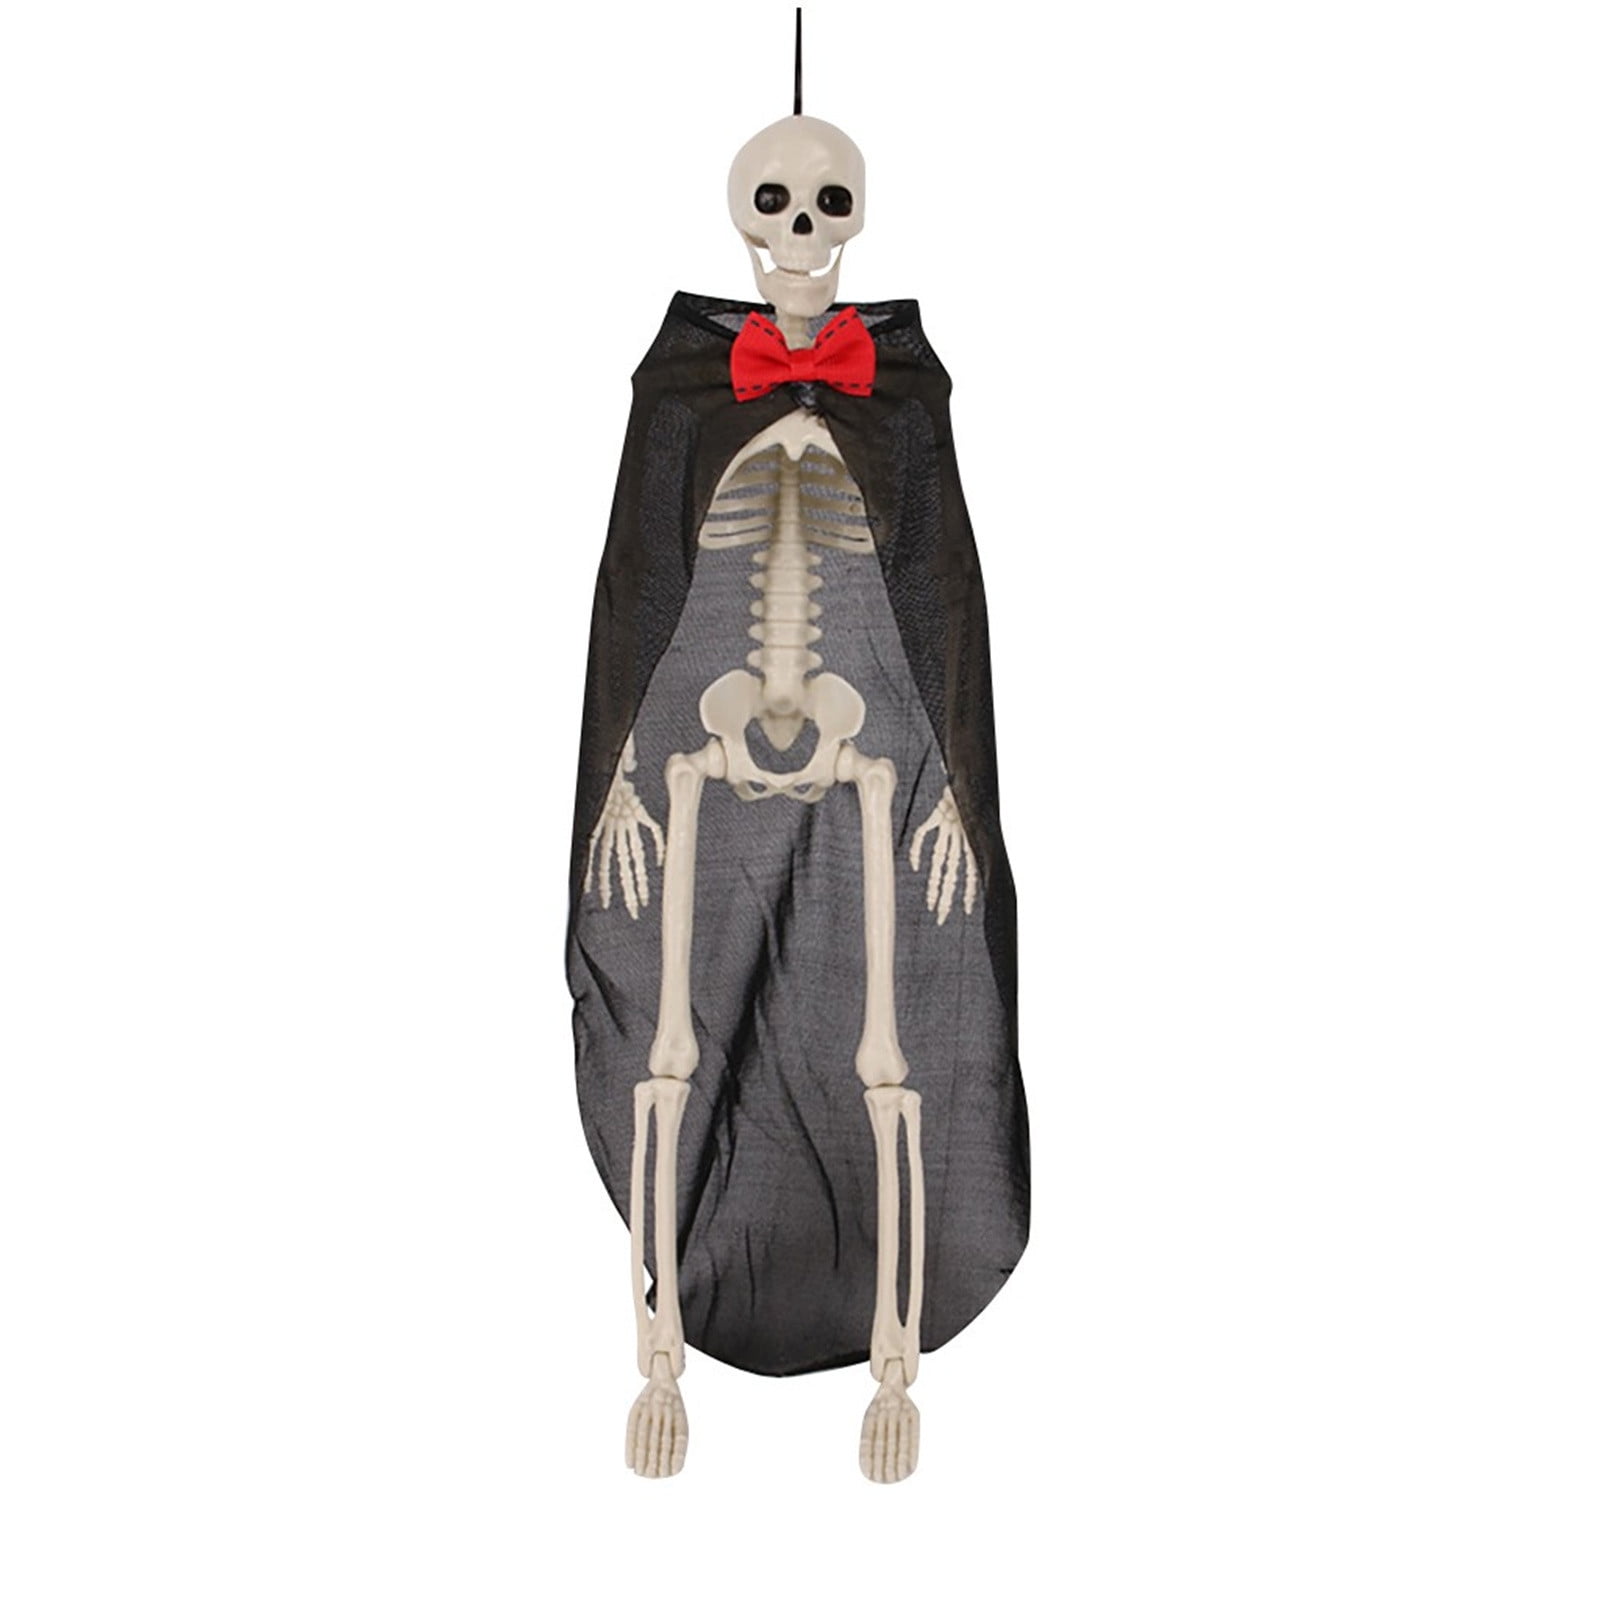 Details about   Skeleton Halloween Tablecloth Skull Decor Halloween Decor Halloween Decorations 